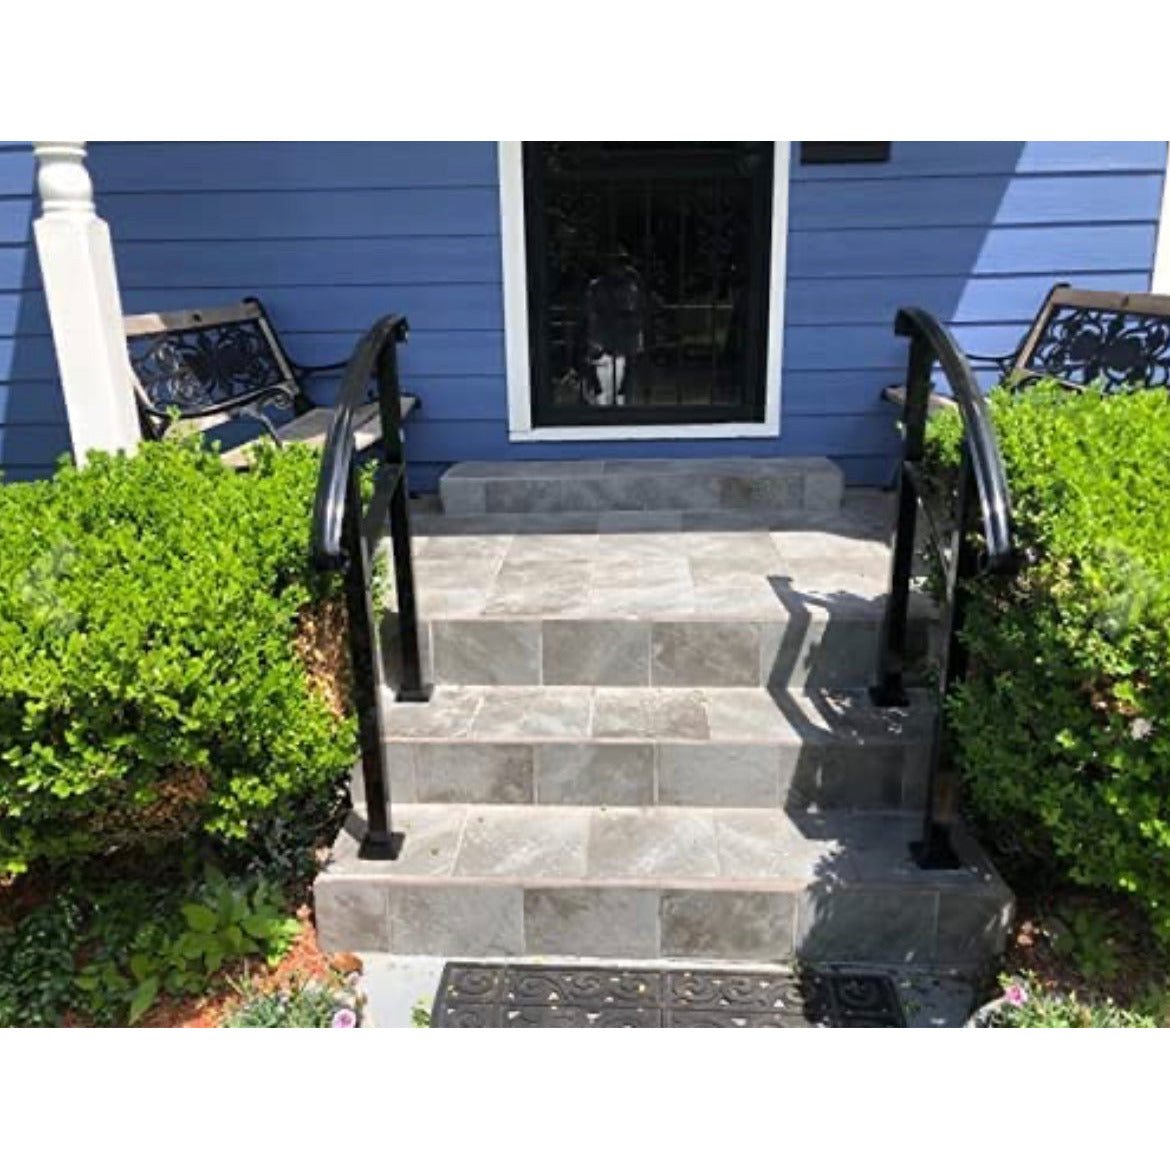 Handrails for Outdoor Steps,3 Step Handrail Fits 1 to 3 Steps Mattle Wrought Iron Handrail Stair Rail with Installation Kit Hand Rails for Outdoor Steps Black - Selzalot